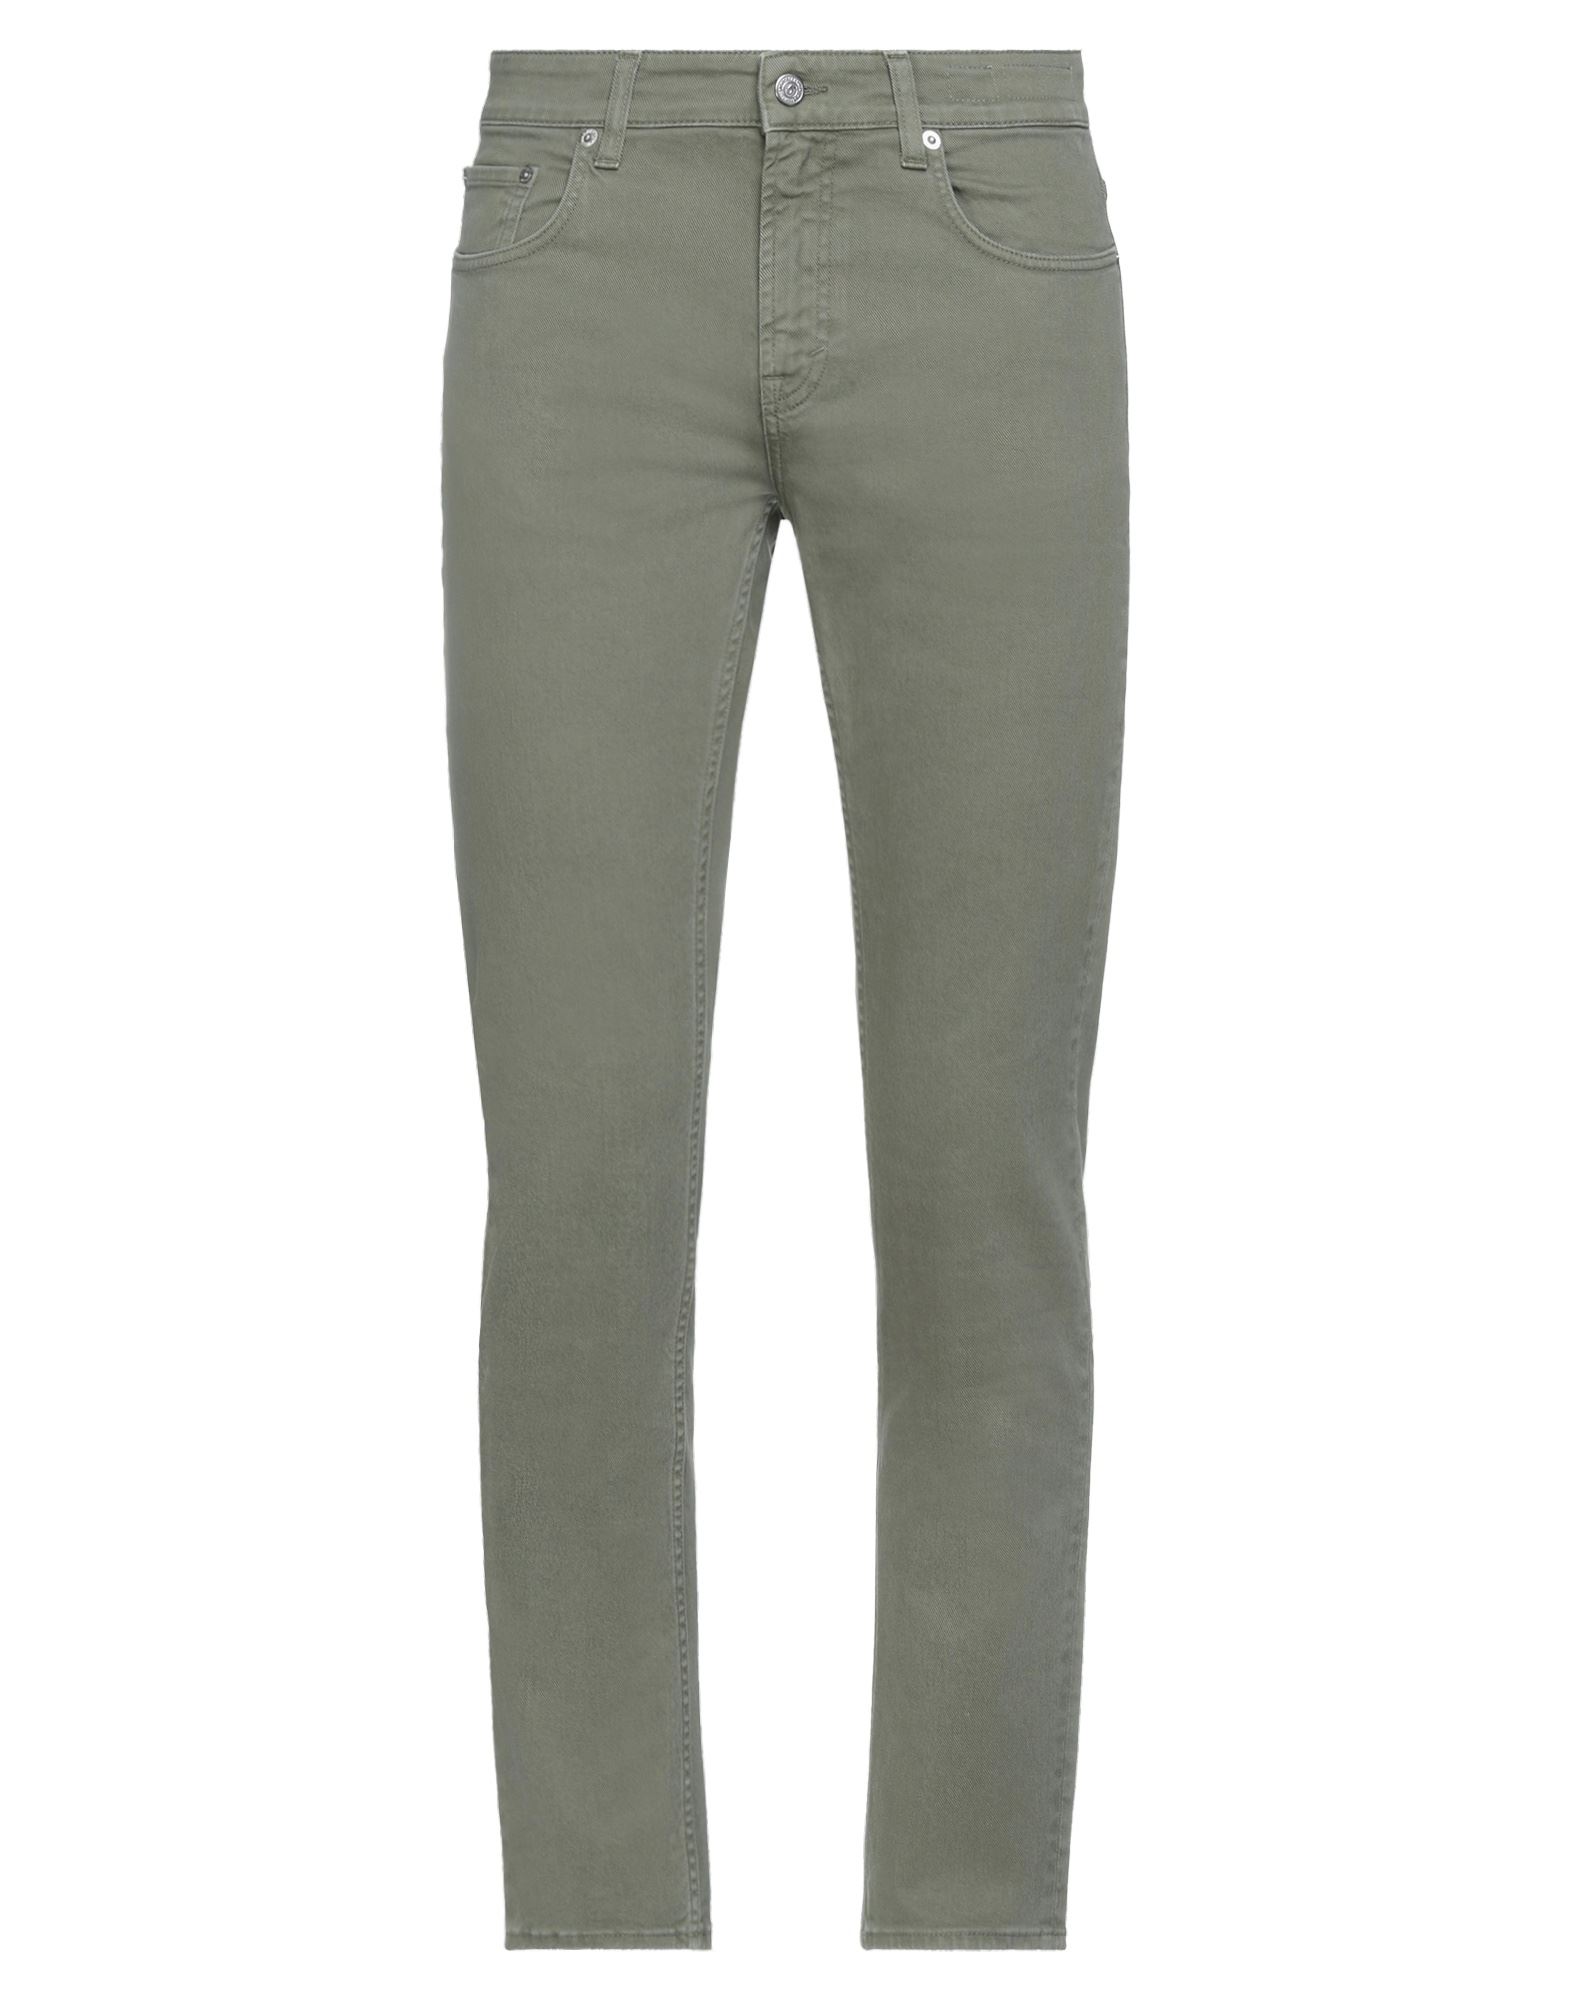 Department 5 Jeans In Military Green